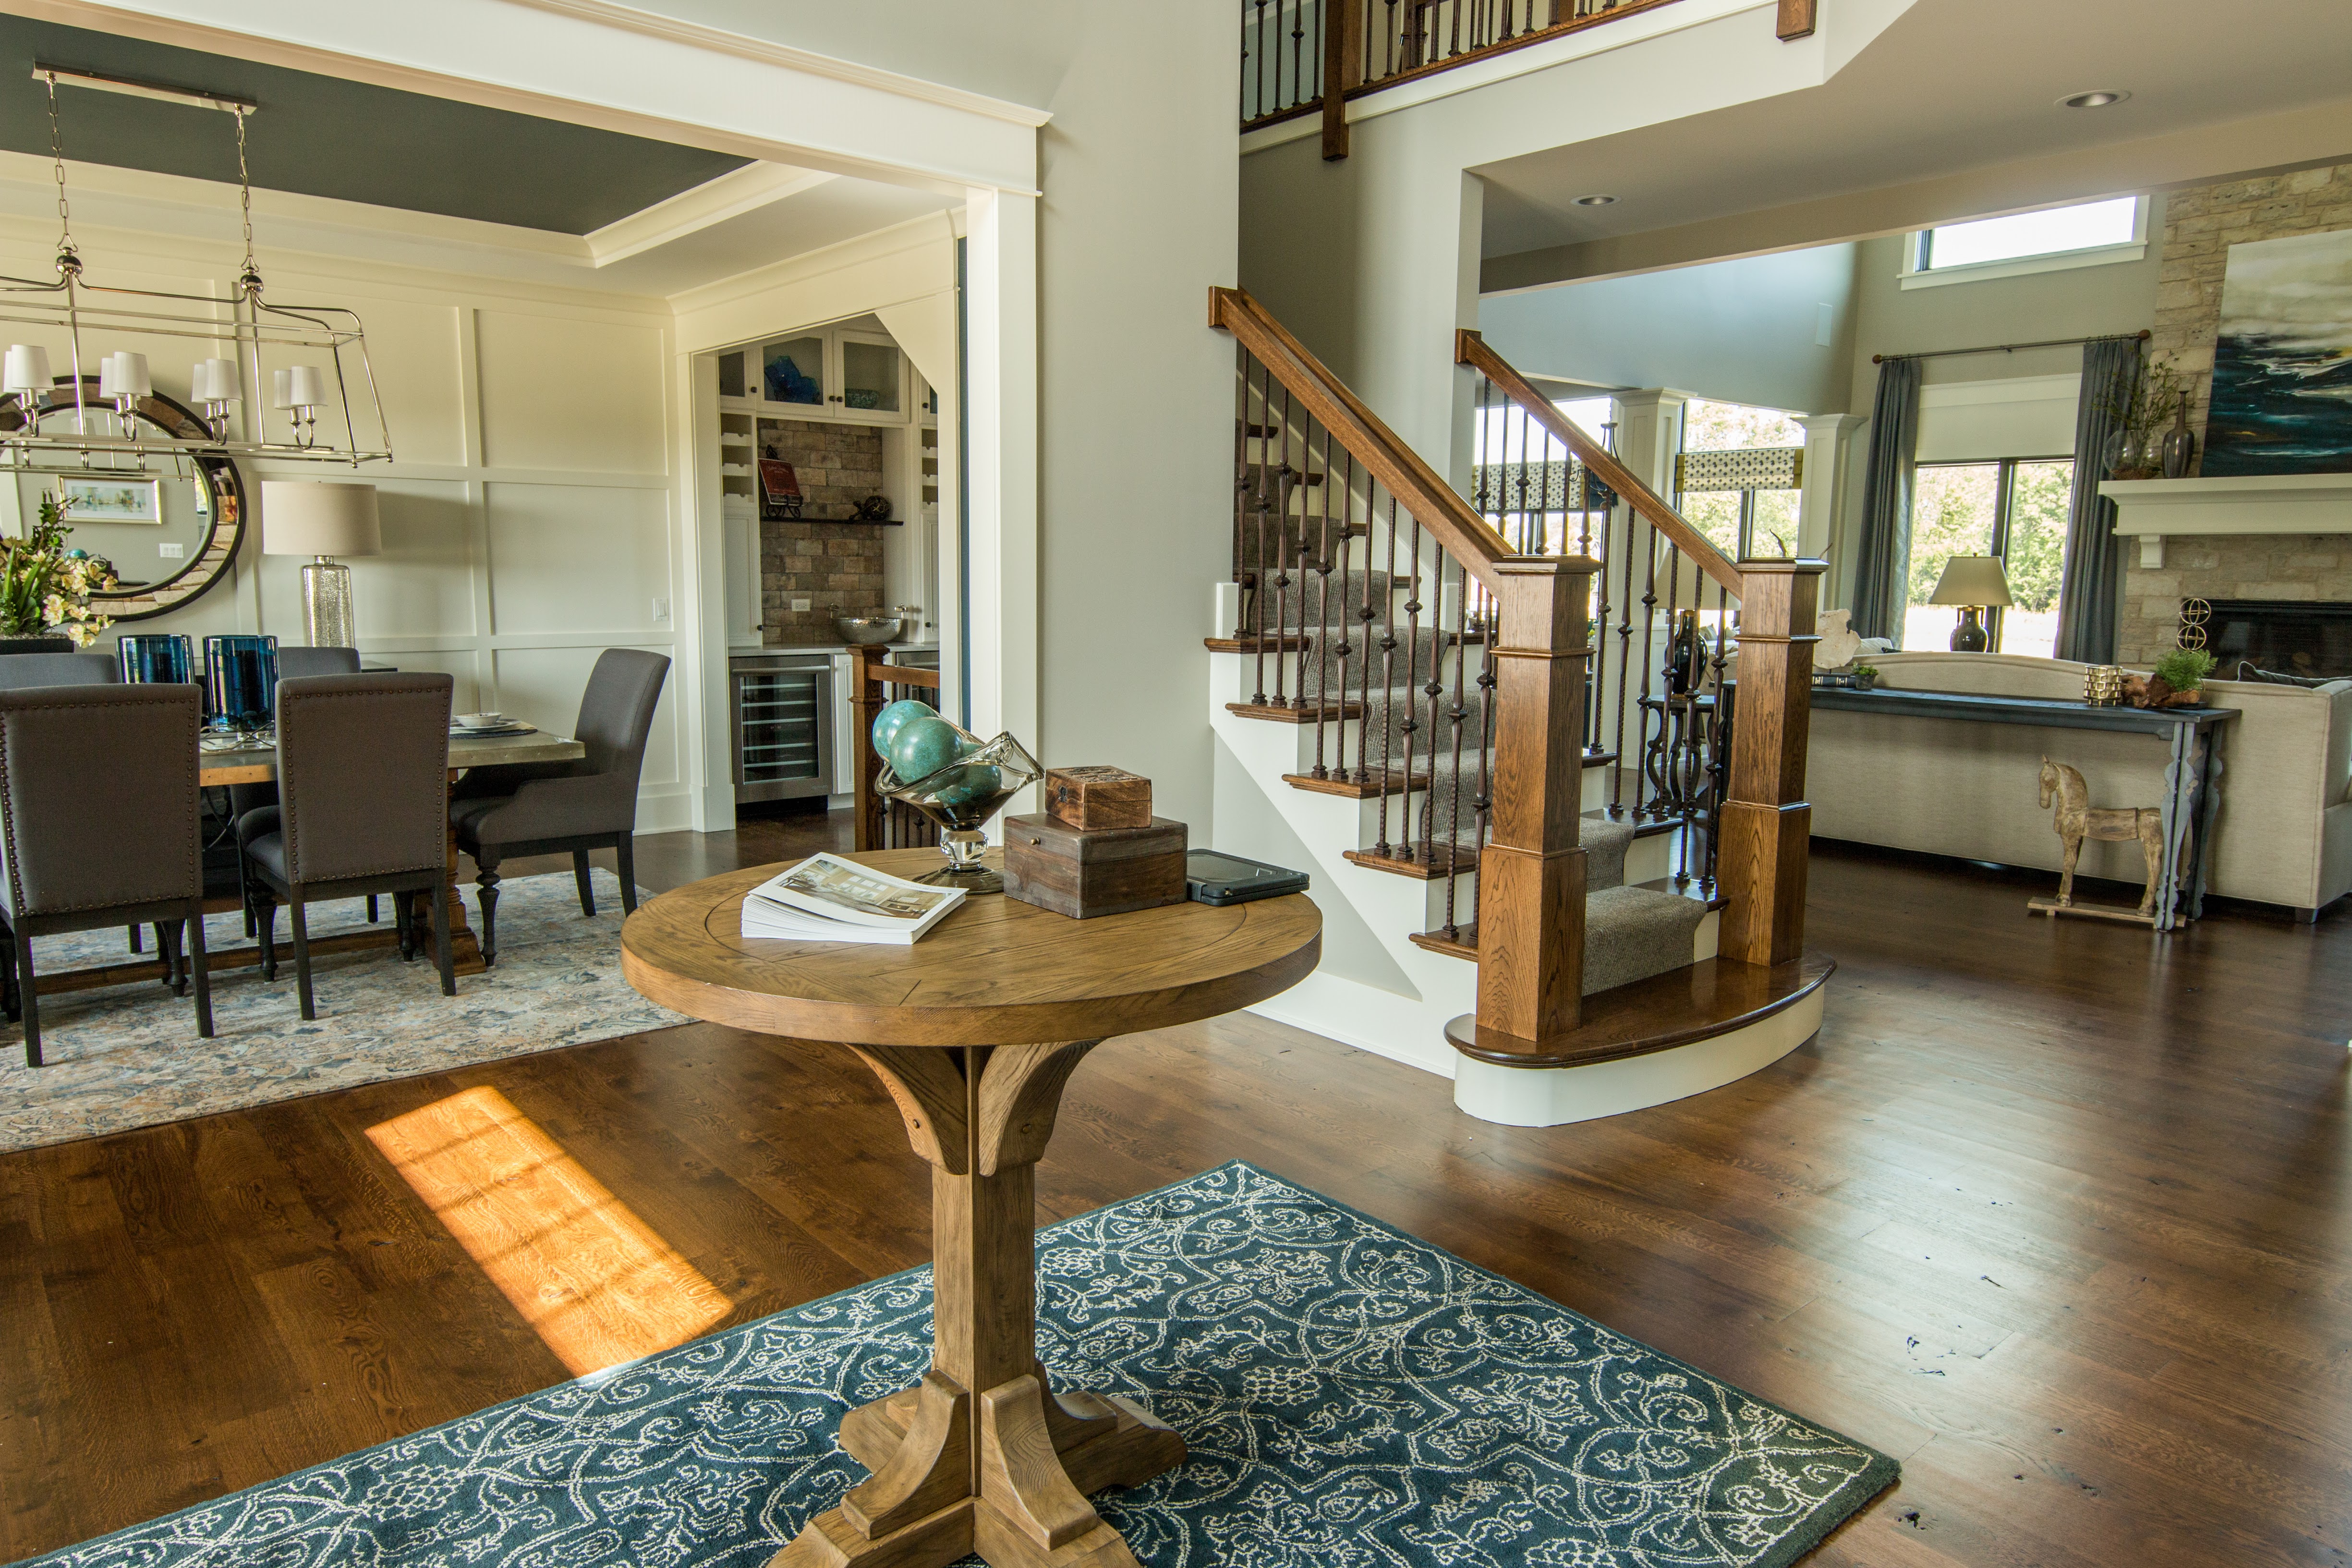 Model home entry with round table and blue rug